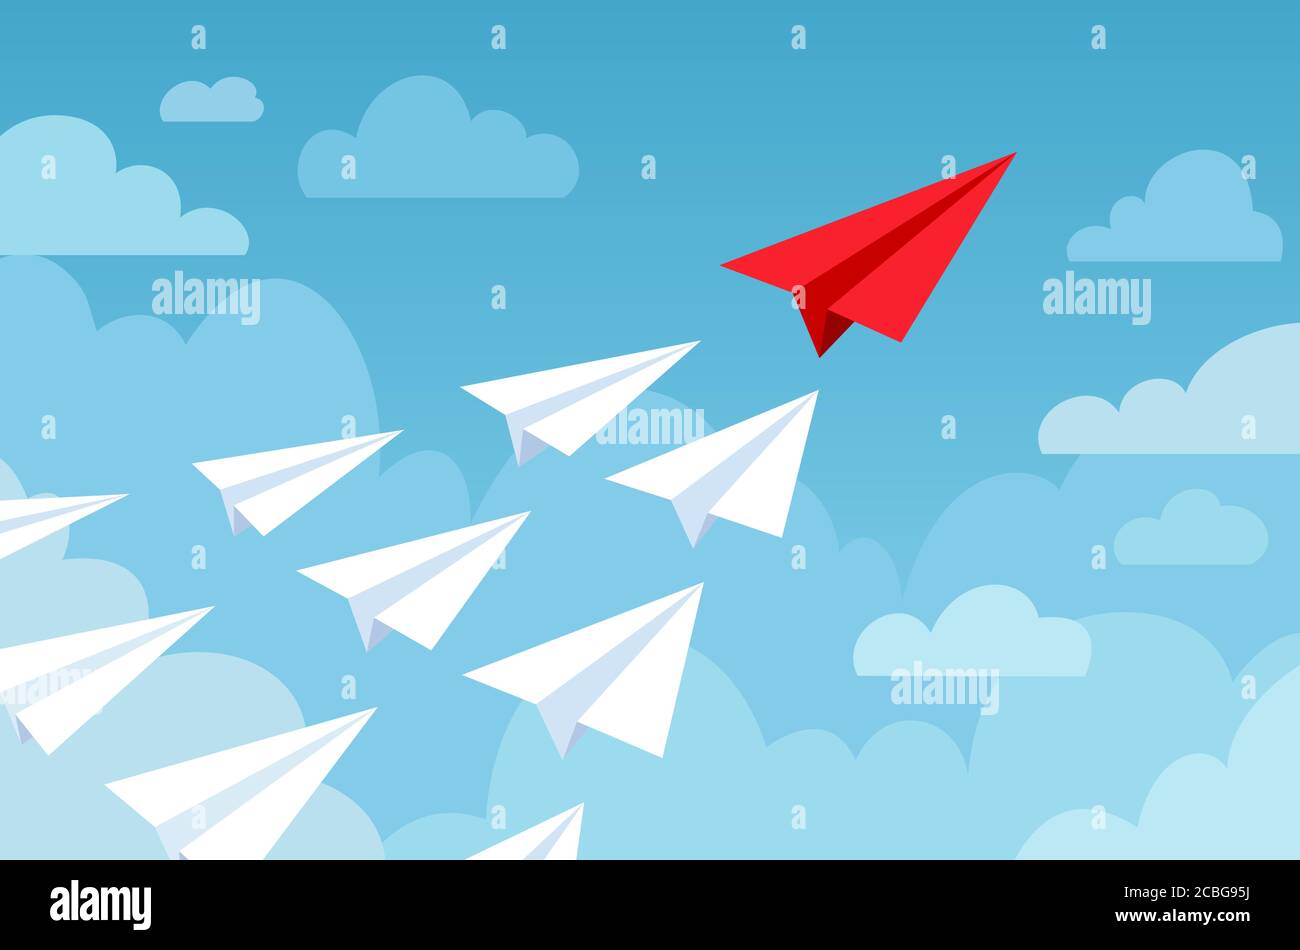 Paper plane. Flying planes white and red color, start up new idea, leadership. Business competition, success financial goal vector concept Stock Vector